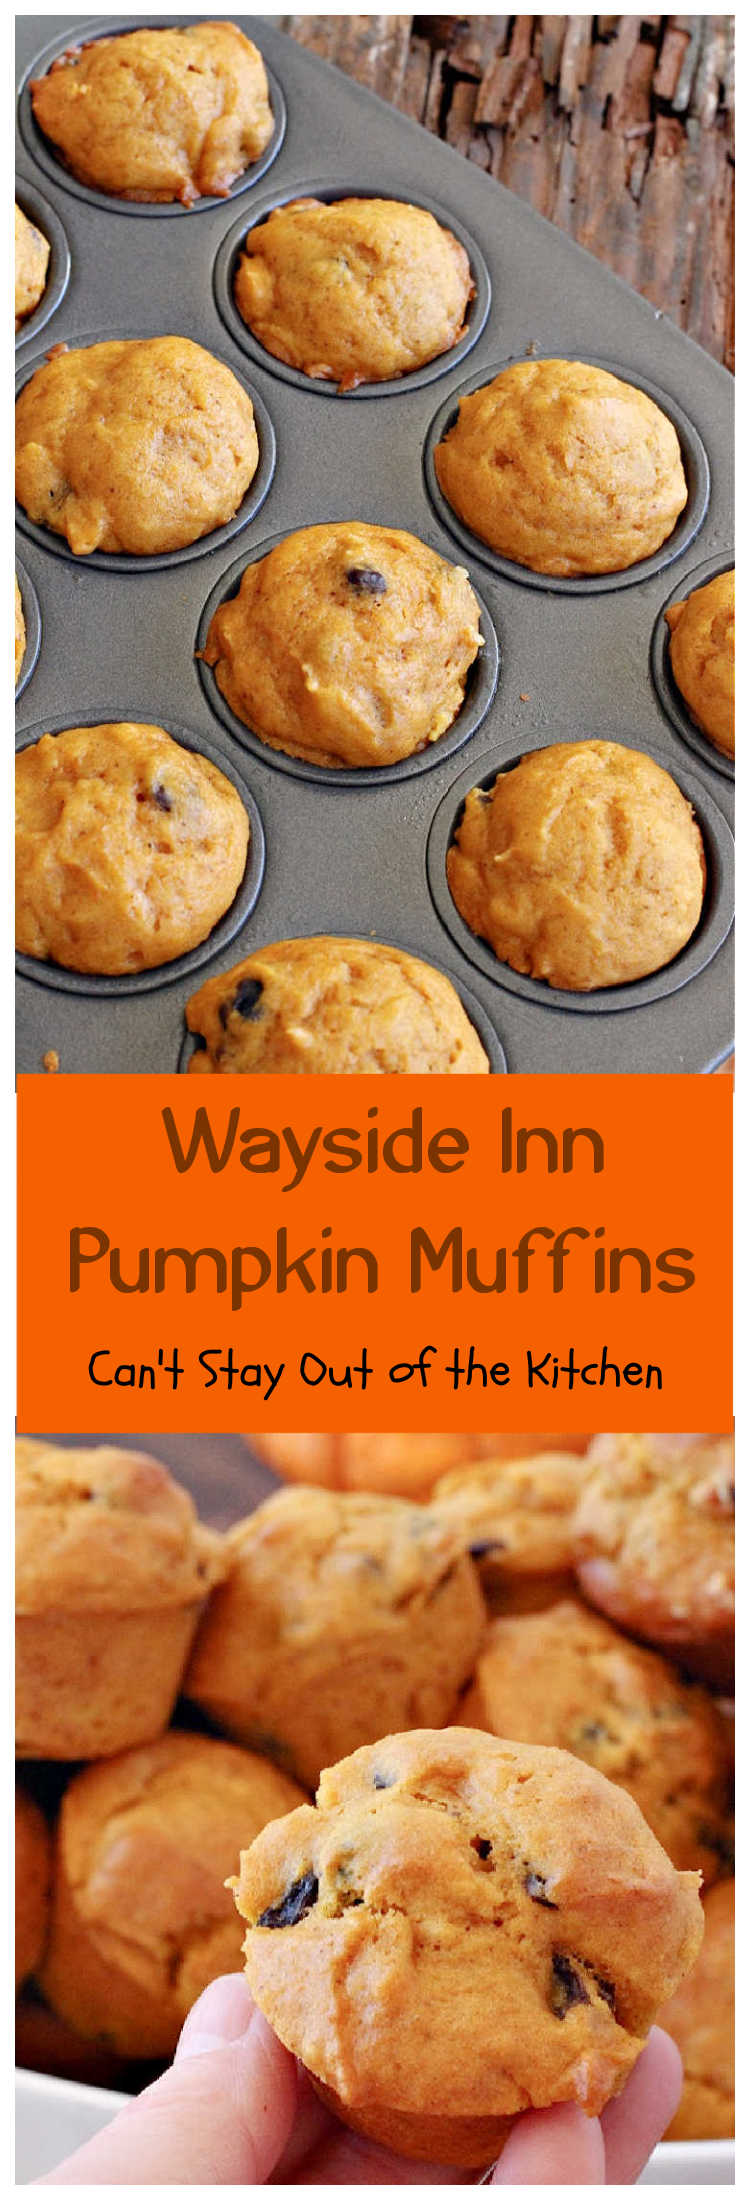 Wayside Inn Pumpkin Muffins | Can't Stay Out of the Kitchen